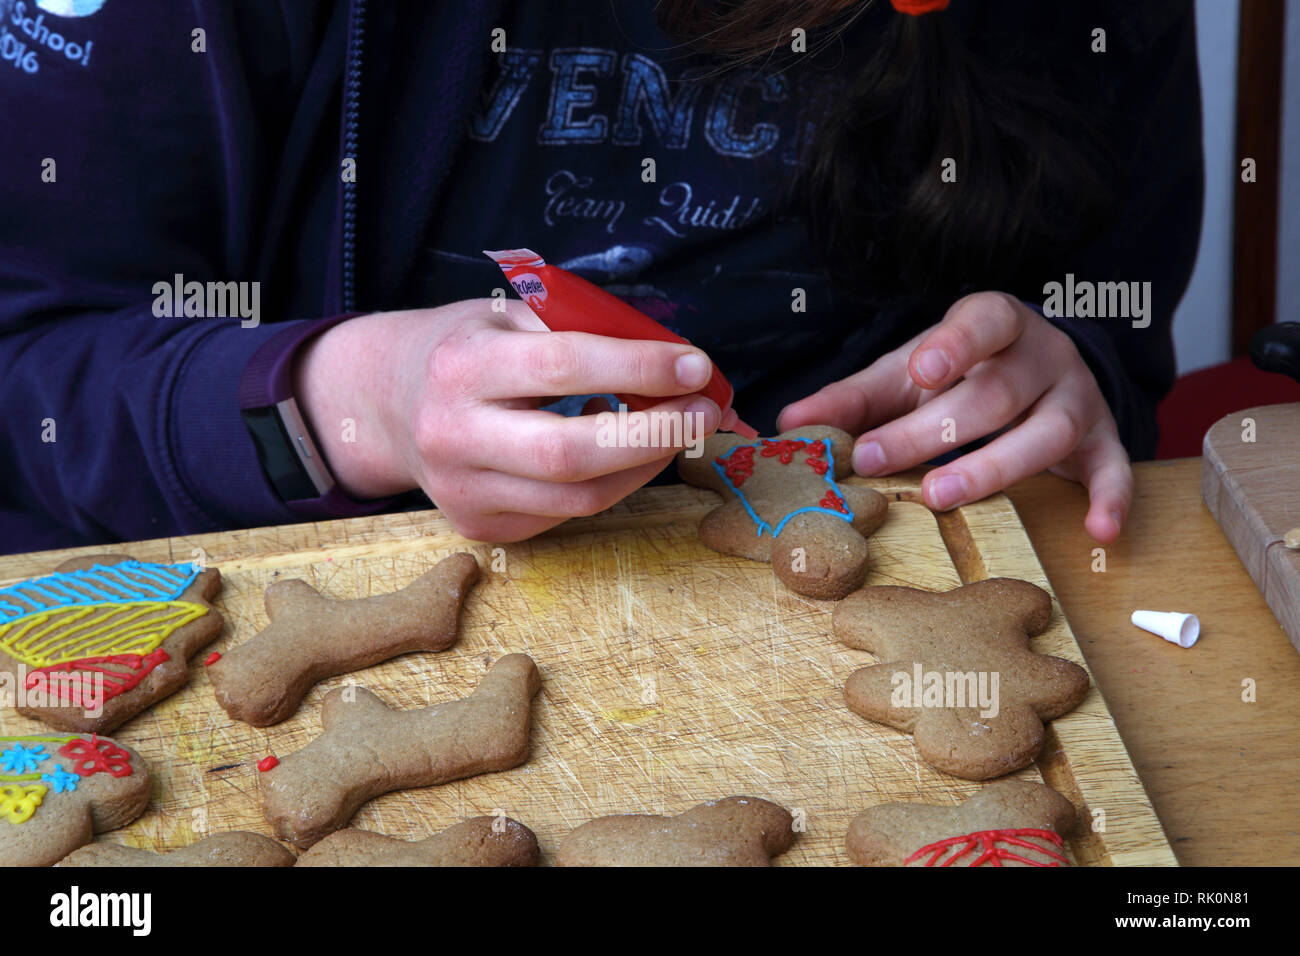 Thirteen Year Old Girl Decorating Christmas Cookies with Red Icing Surrey England Stock Photo